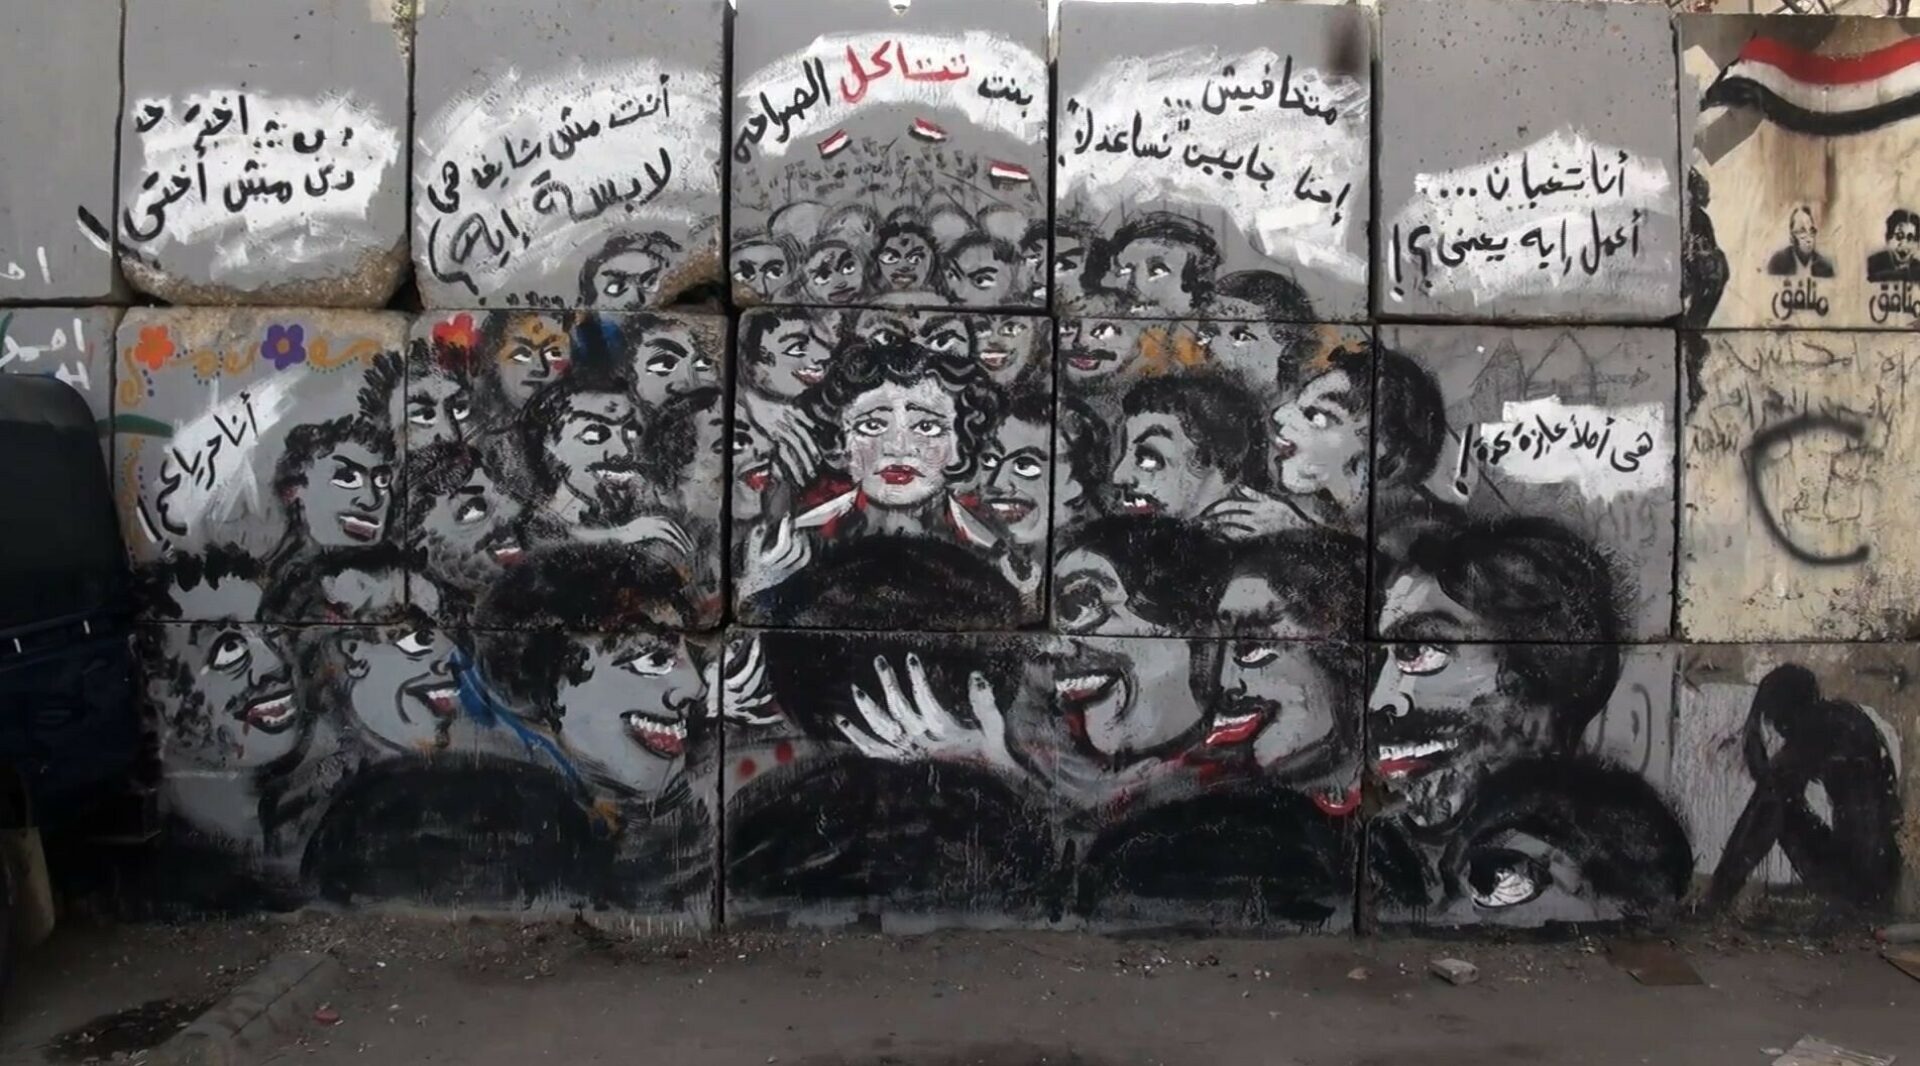 Graffiti against sexual harassment on a house wall in Cairo (graffiti art by Mira Shihadeh)